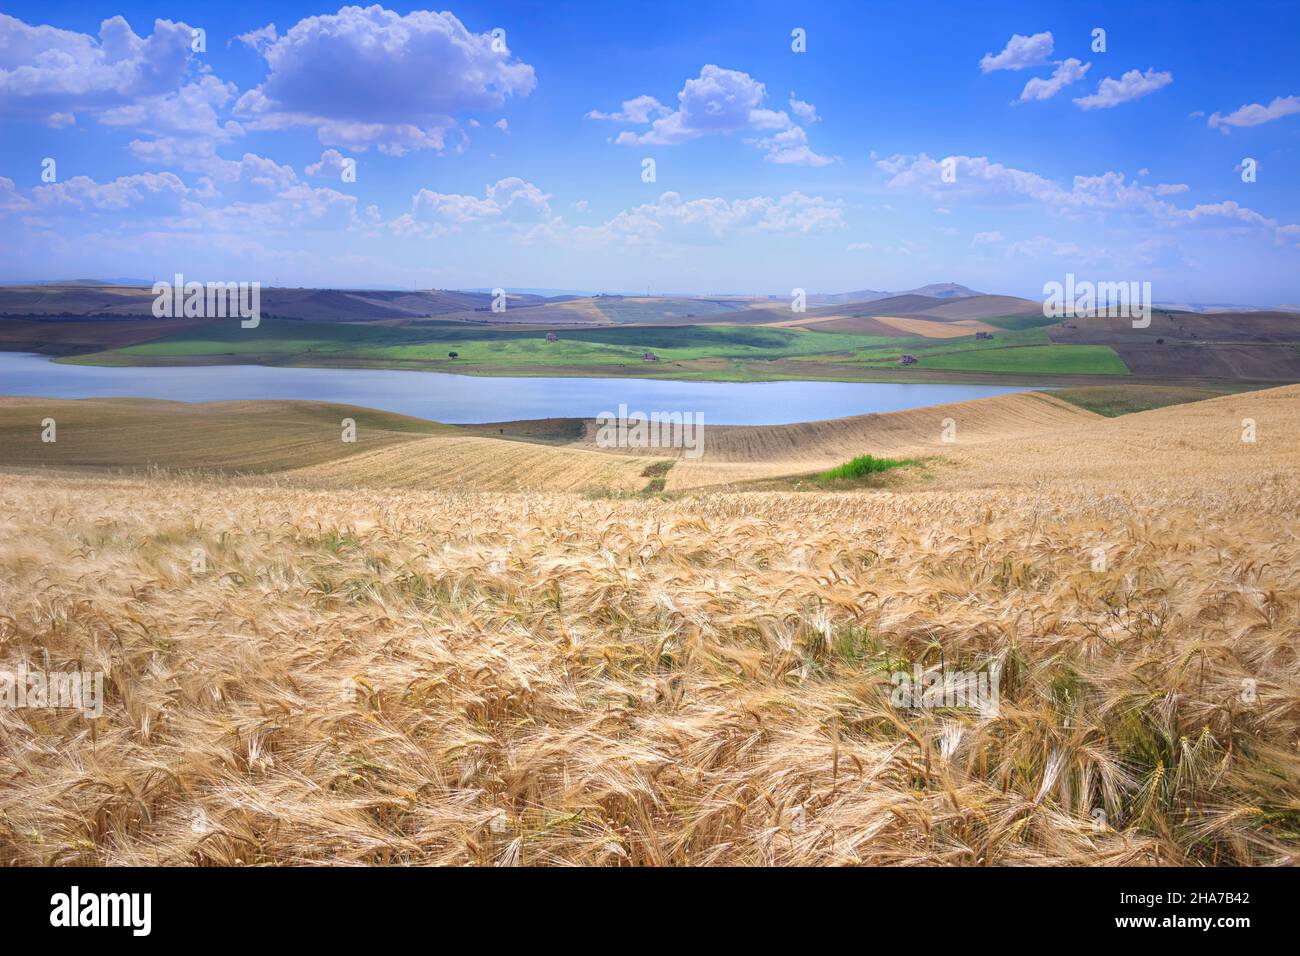 Between Apulia and Basilicata: Lake Basentello ( or Serra del Corvo) surrounded by cultivated hills with cereal fields in Italy. Stock Photo